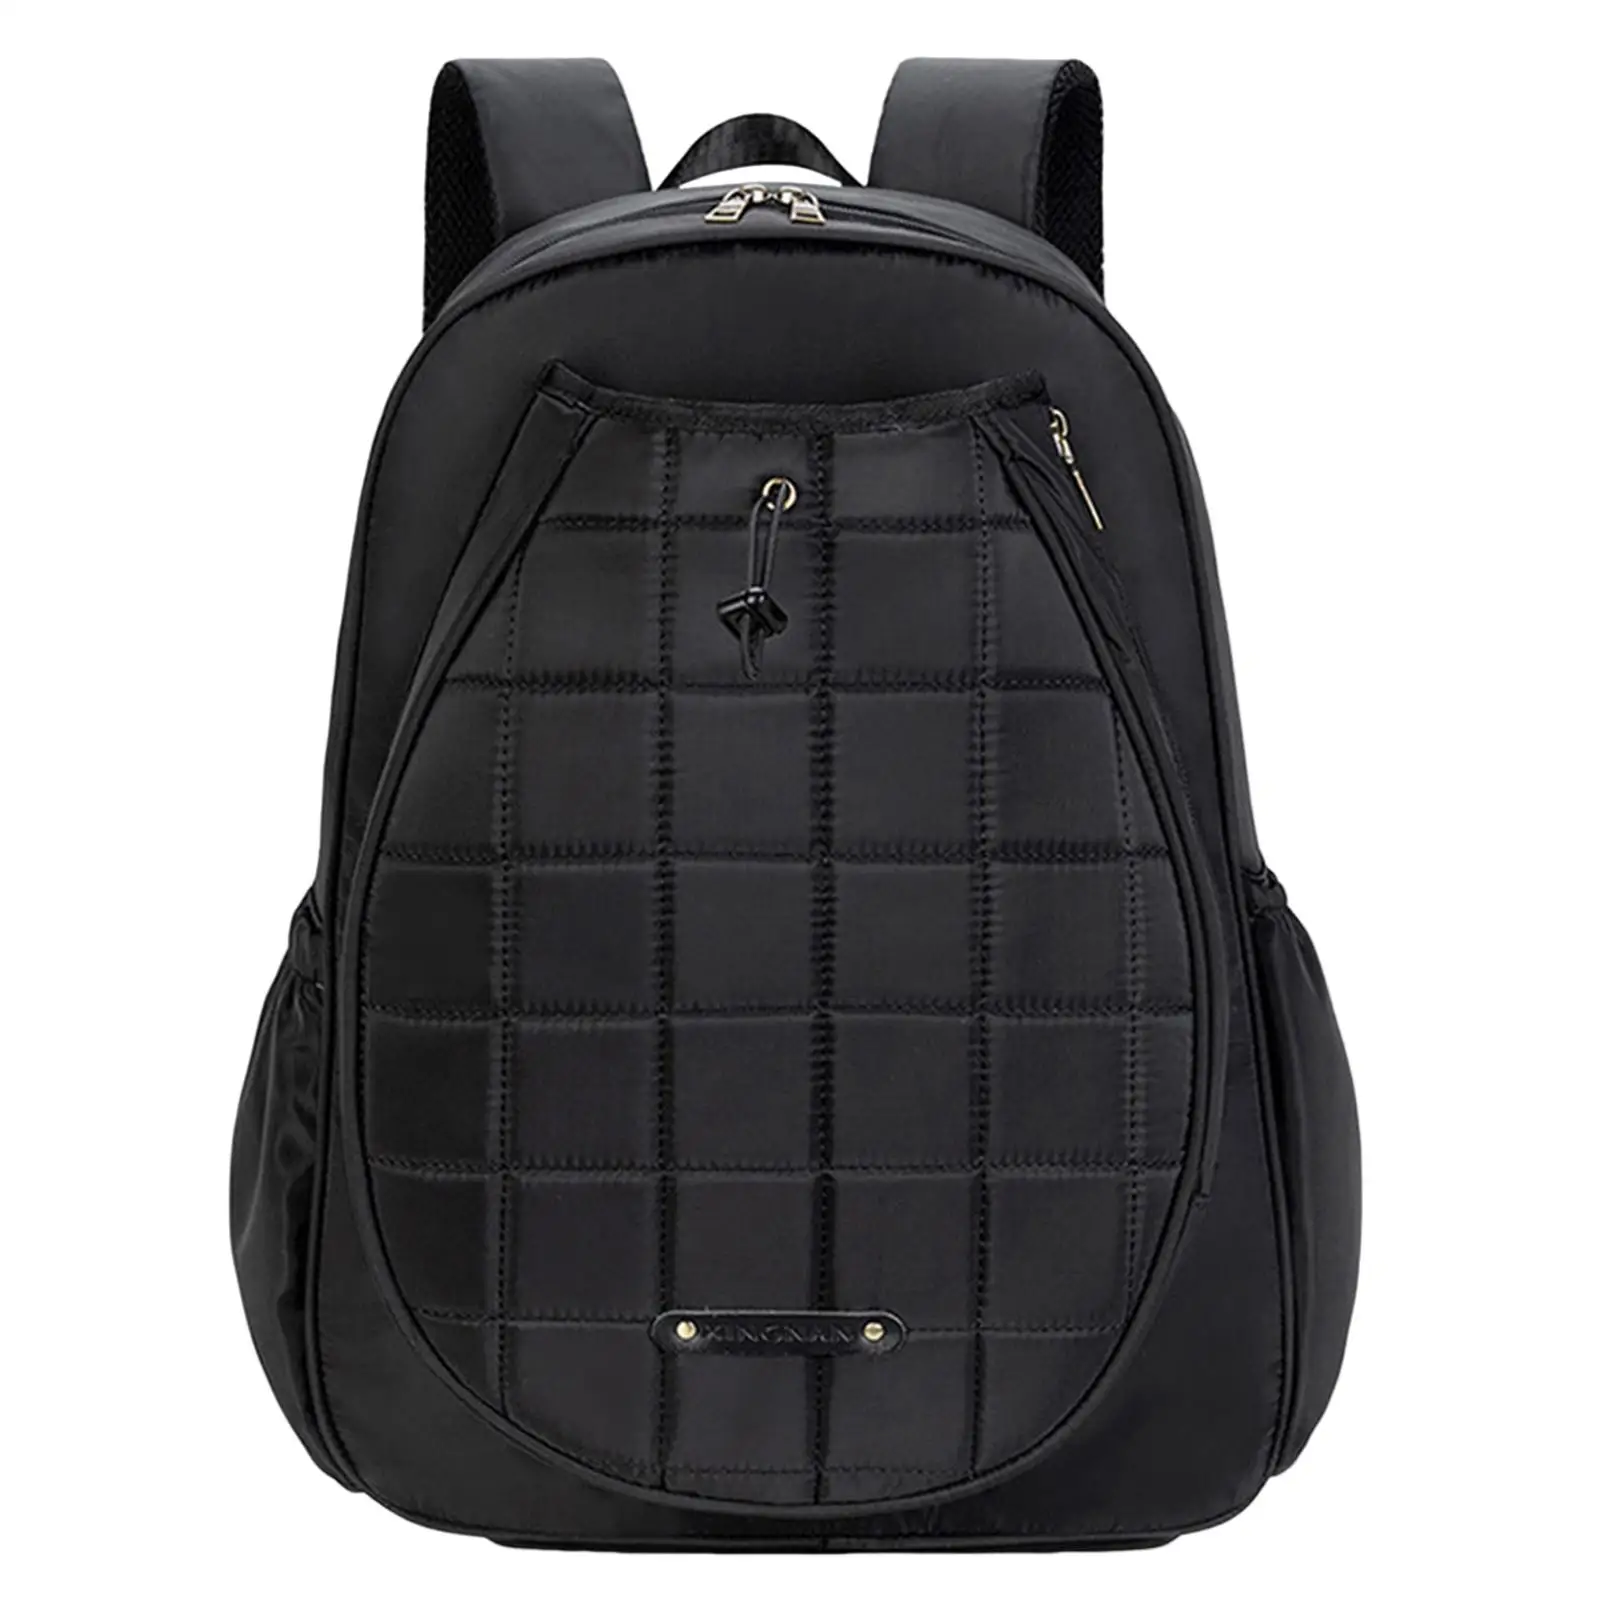 Tennis Backpack Tennis Bag Portable for Balls Accessories Pickleball Paddles